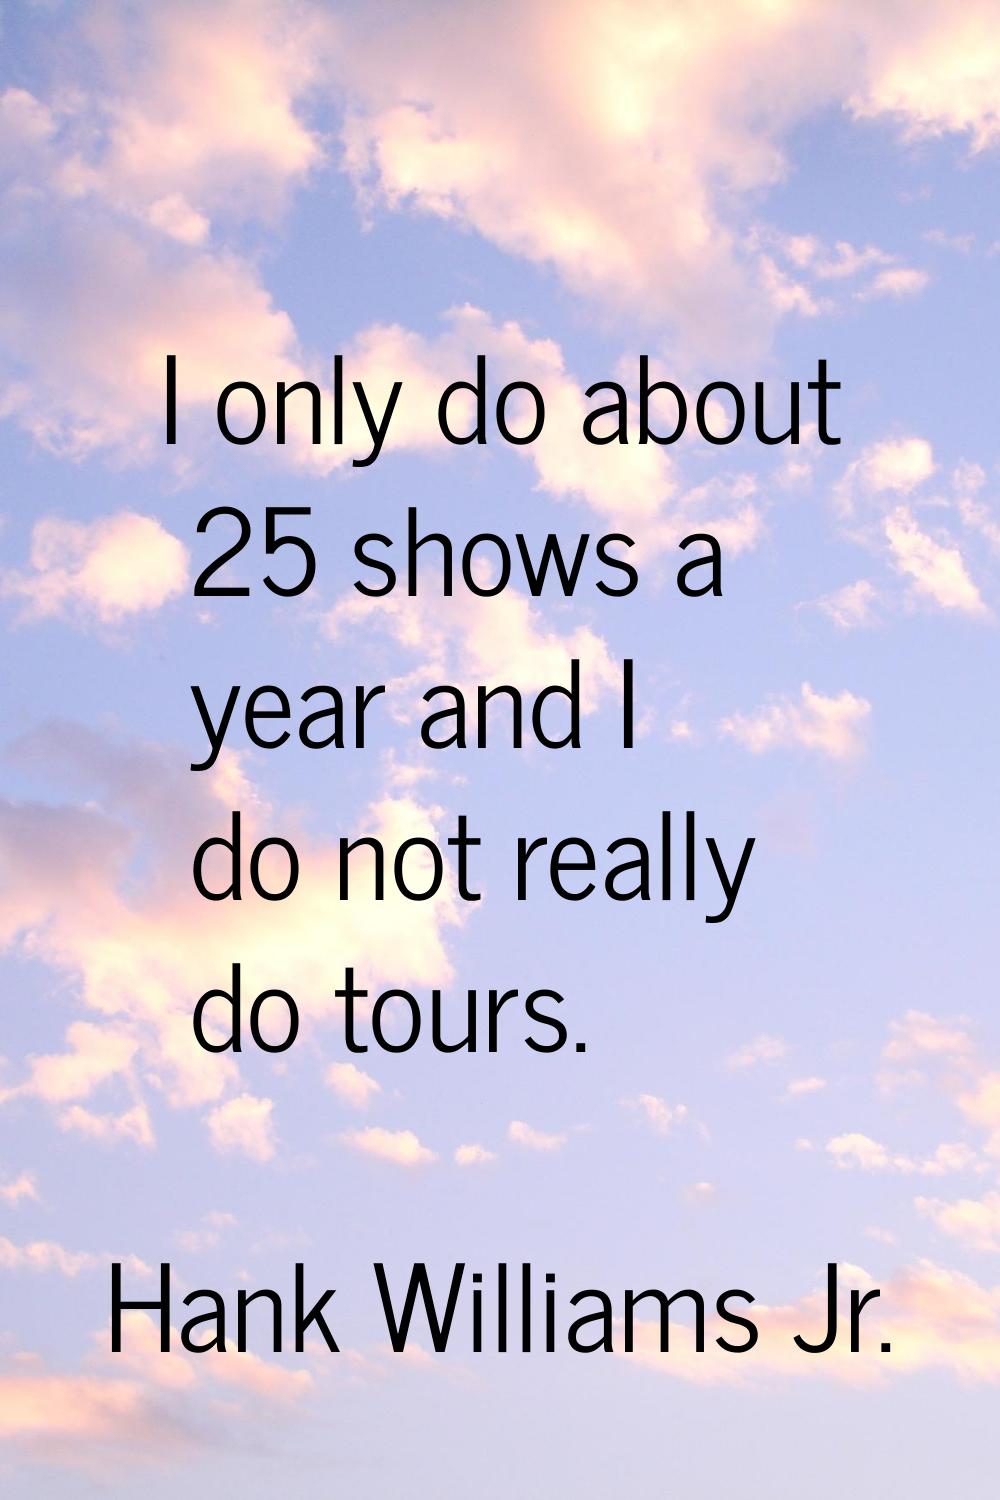 I only do about 25 shows a year and I do not really do tours.